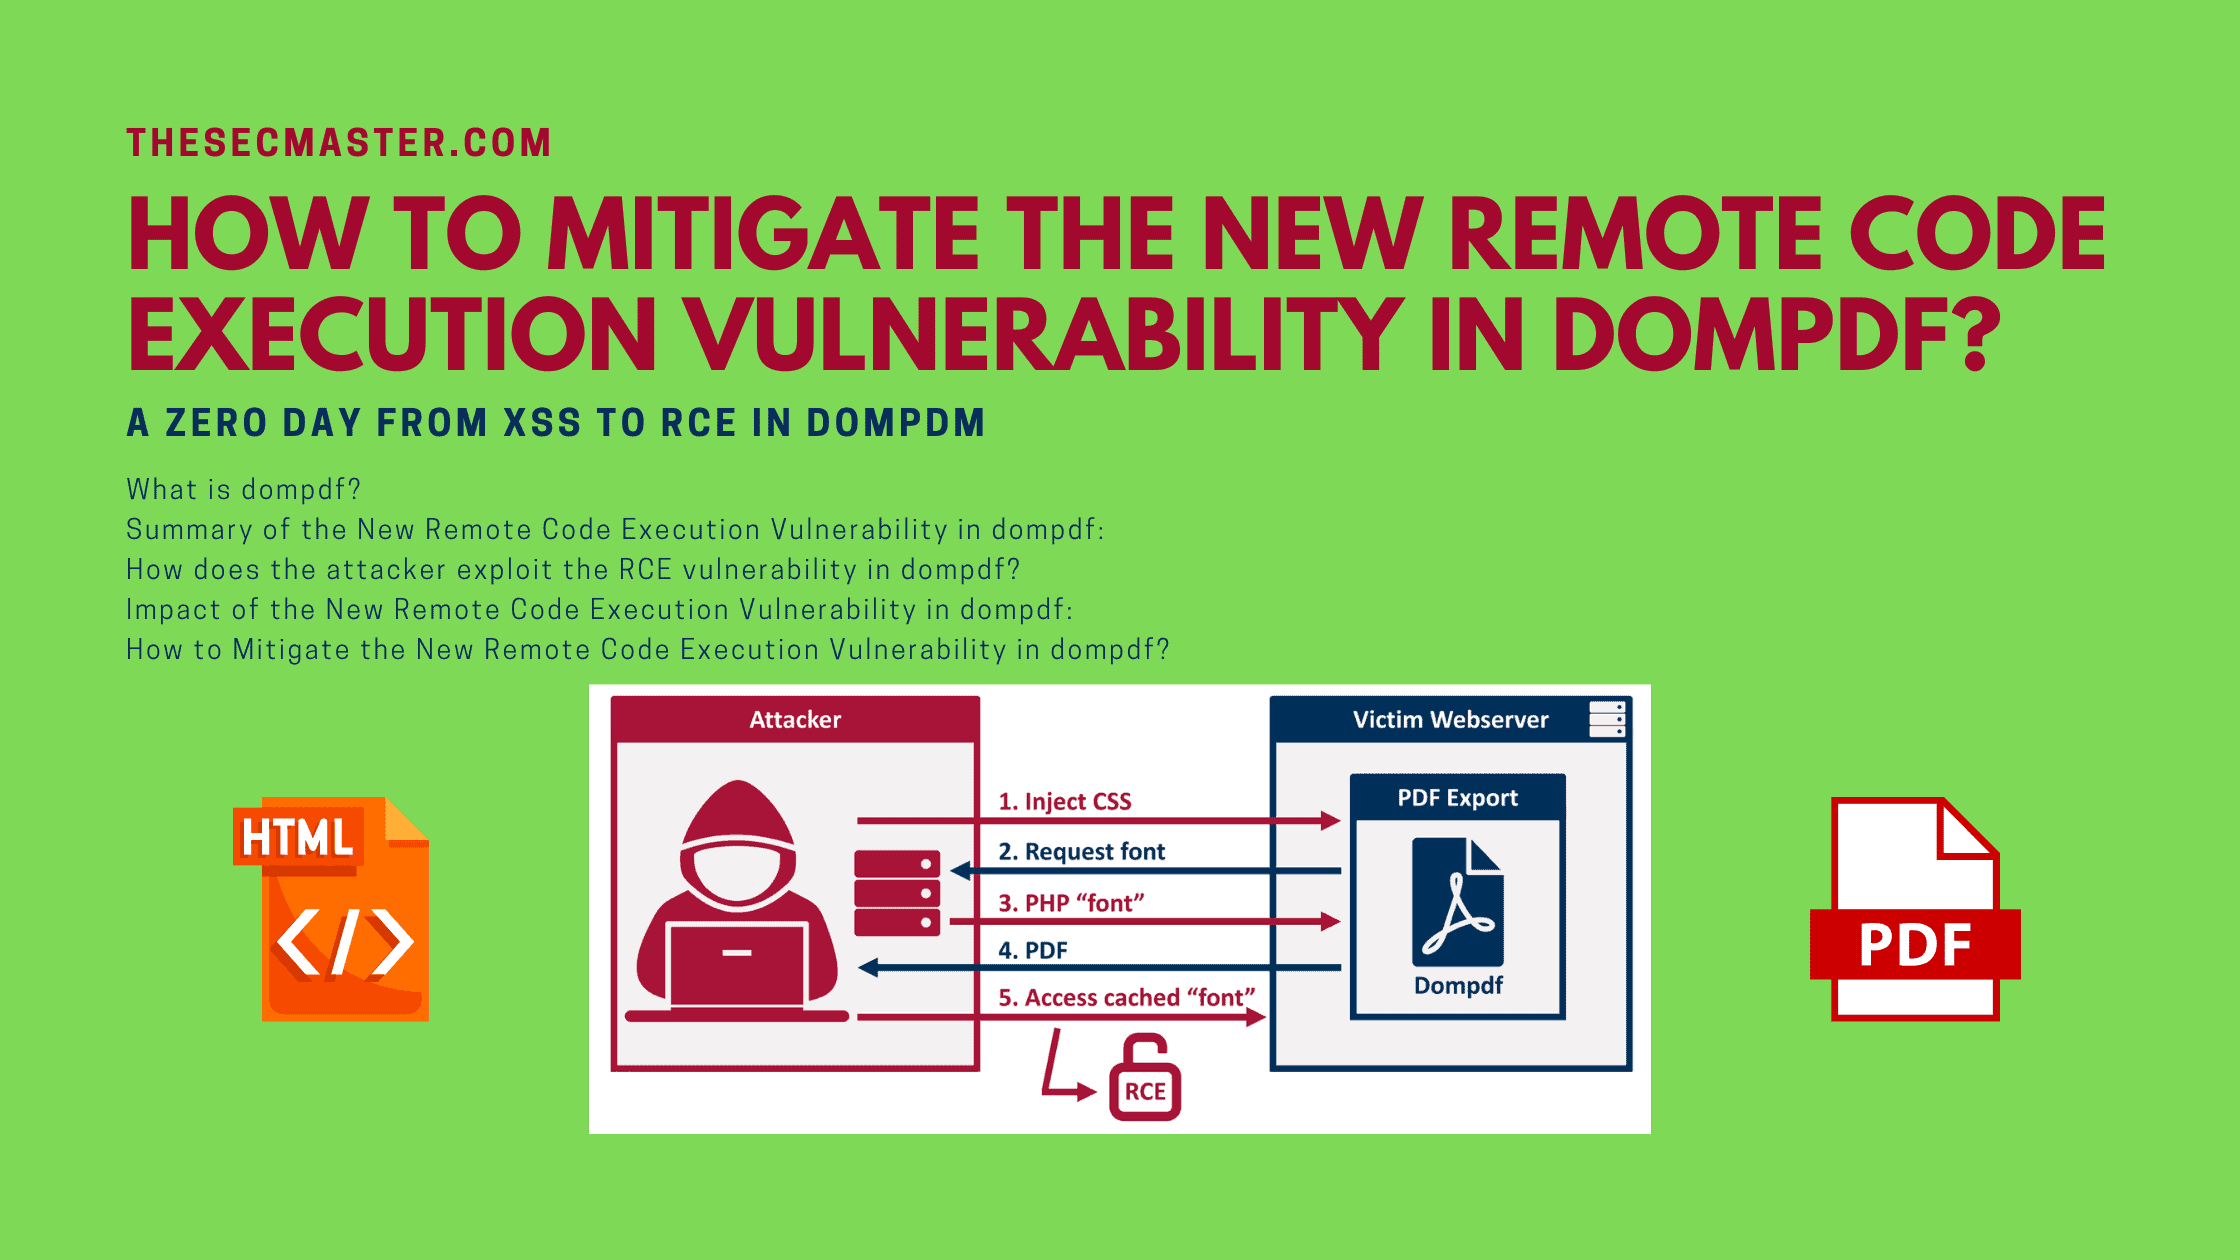 How To Mitigate The New Remote Code Execution Vulnerability In Dompdf